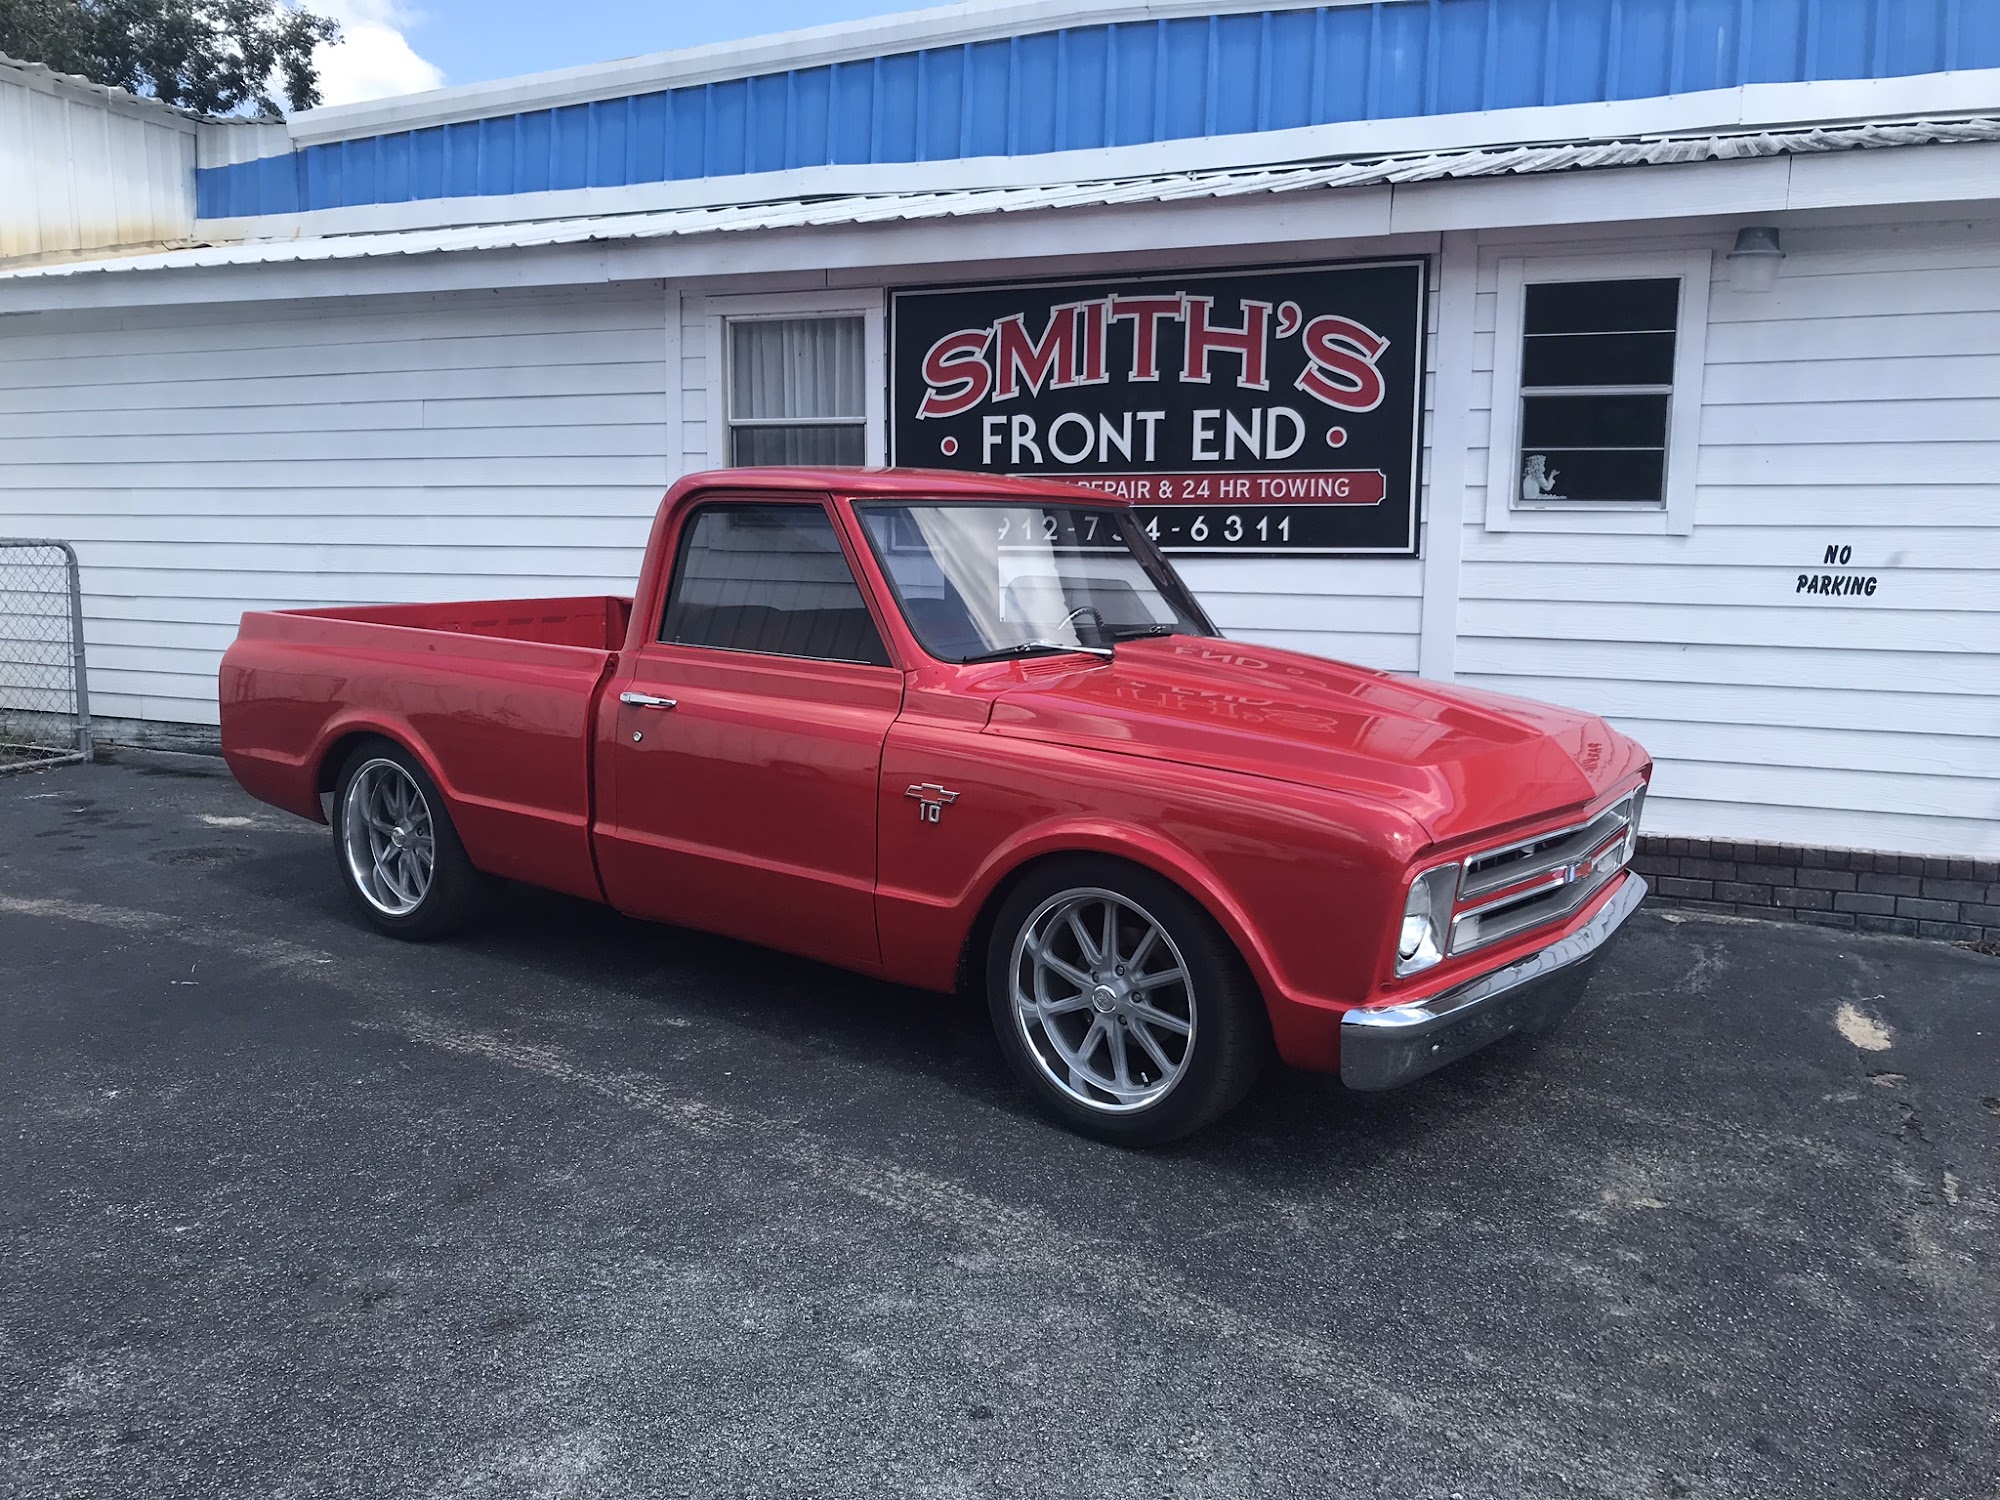 Smith's Front End & Auto Rpr